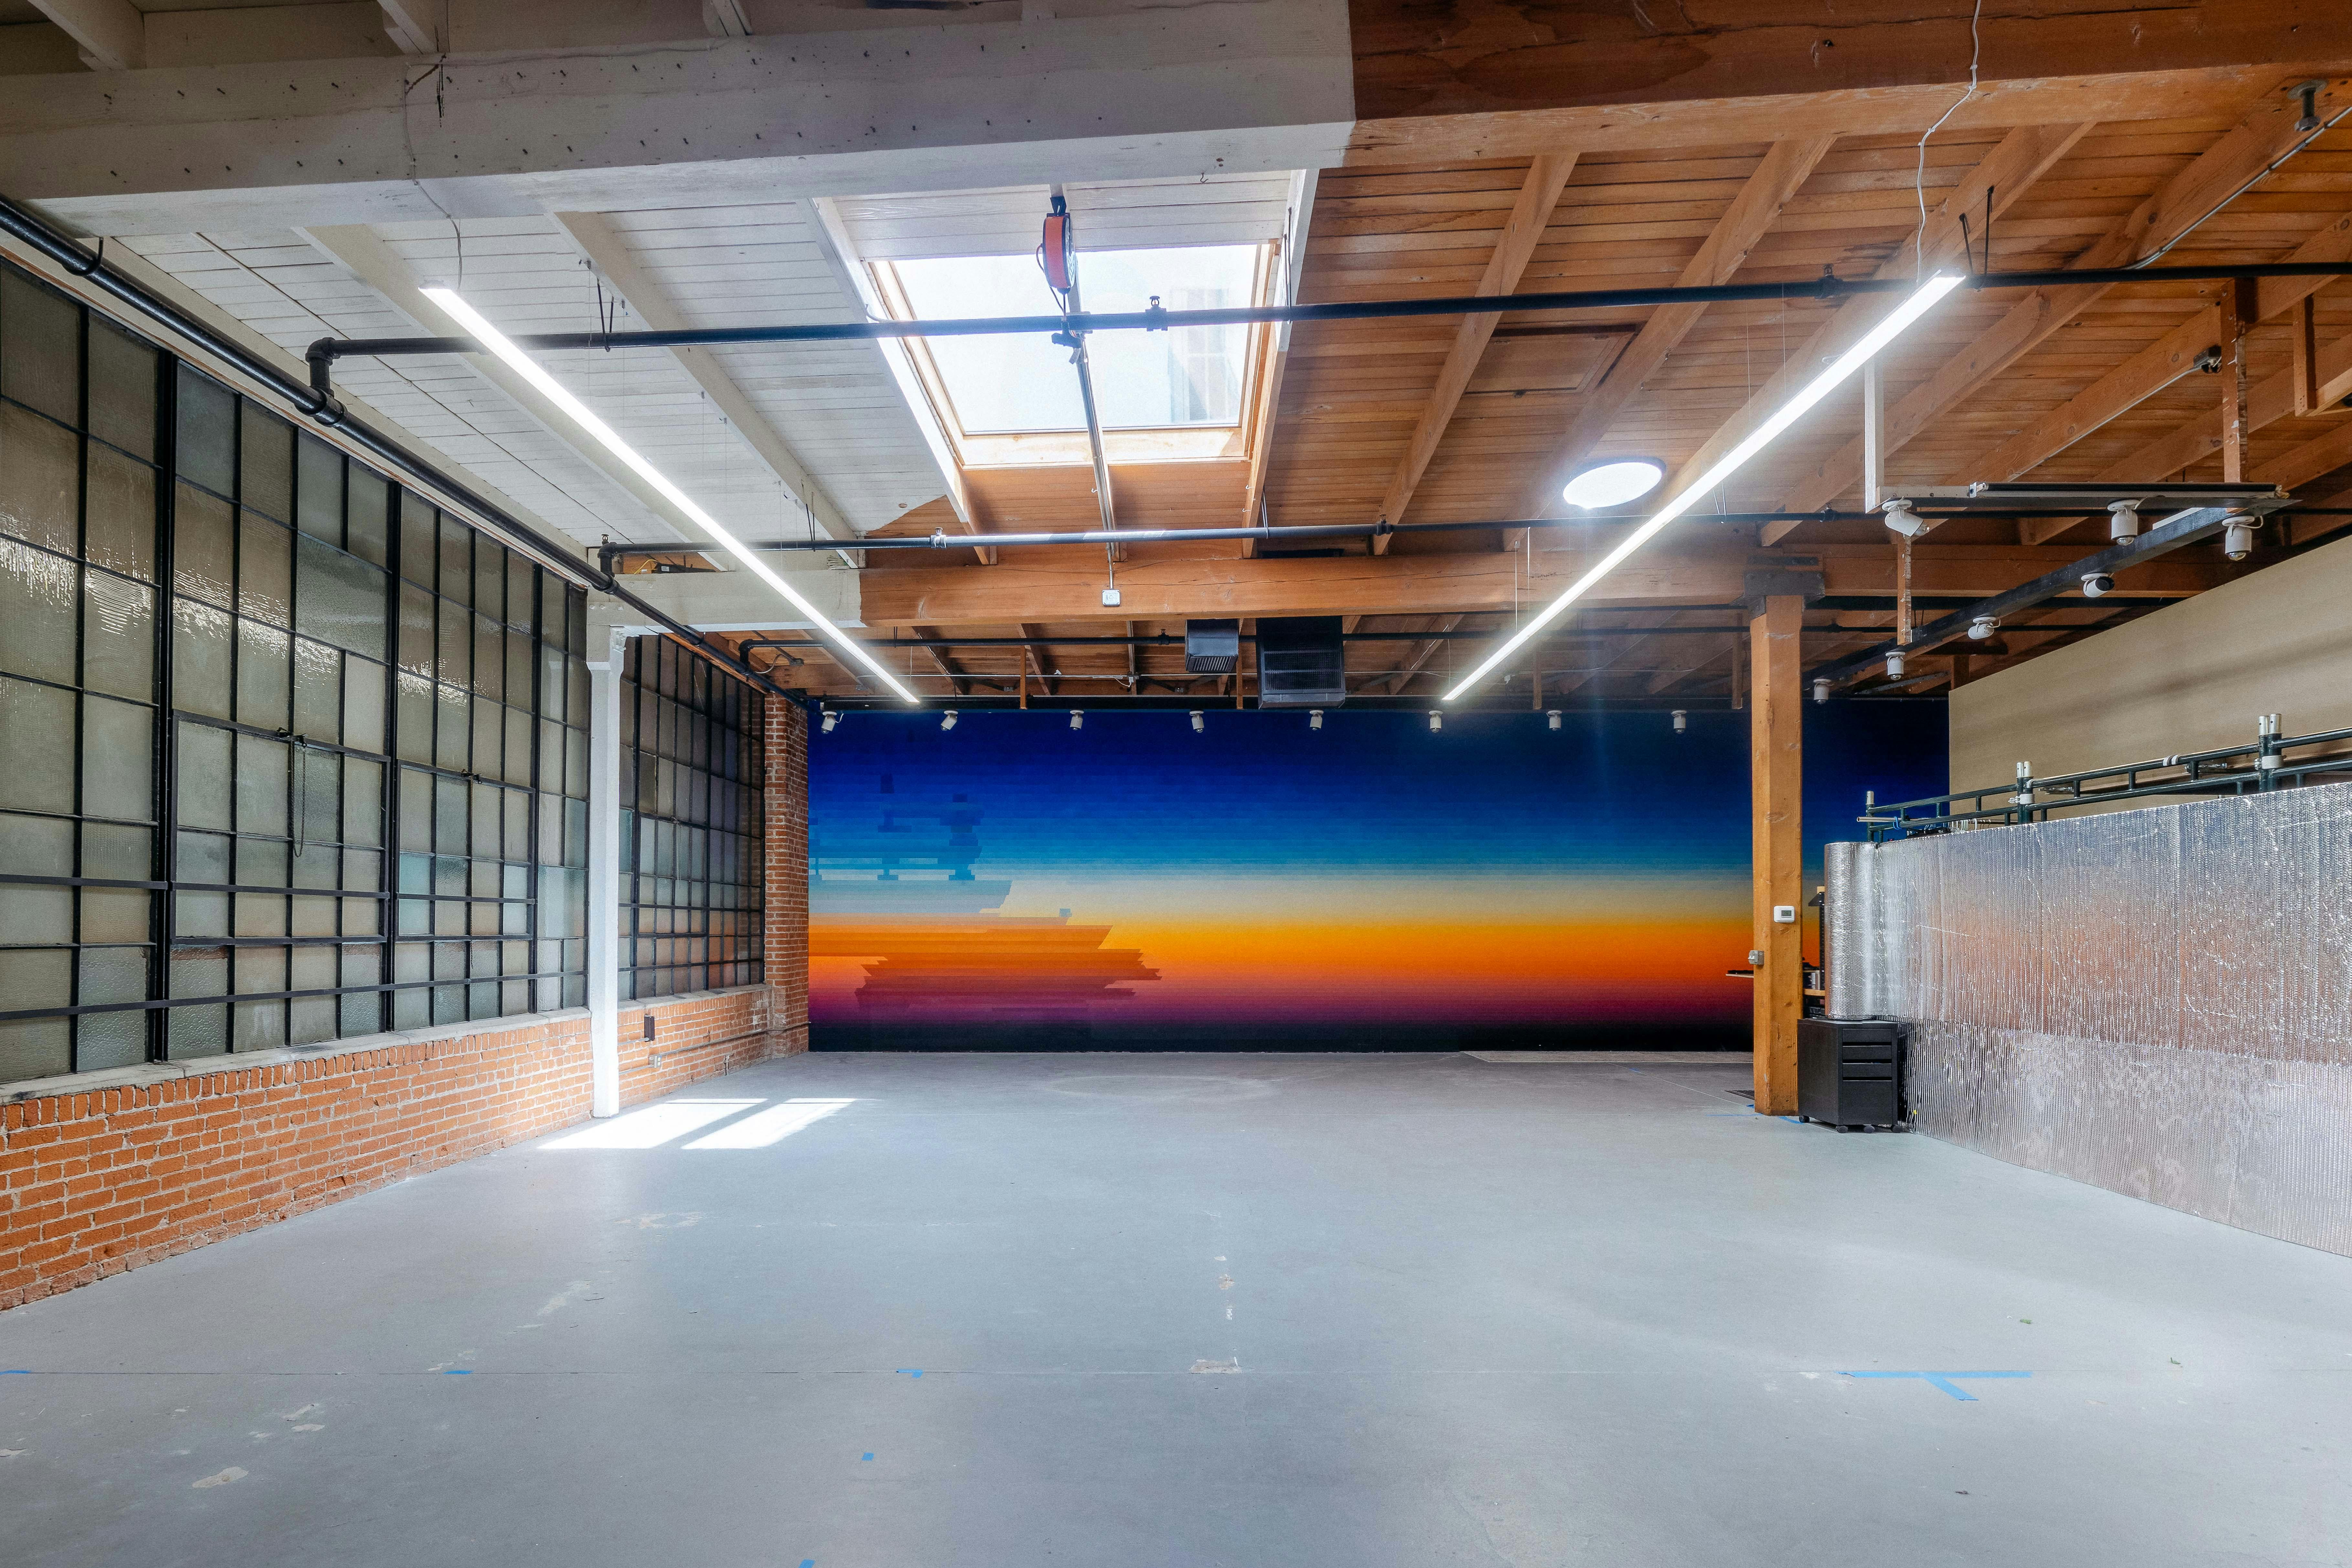 An empty studio space with a vibrant mural